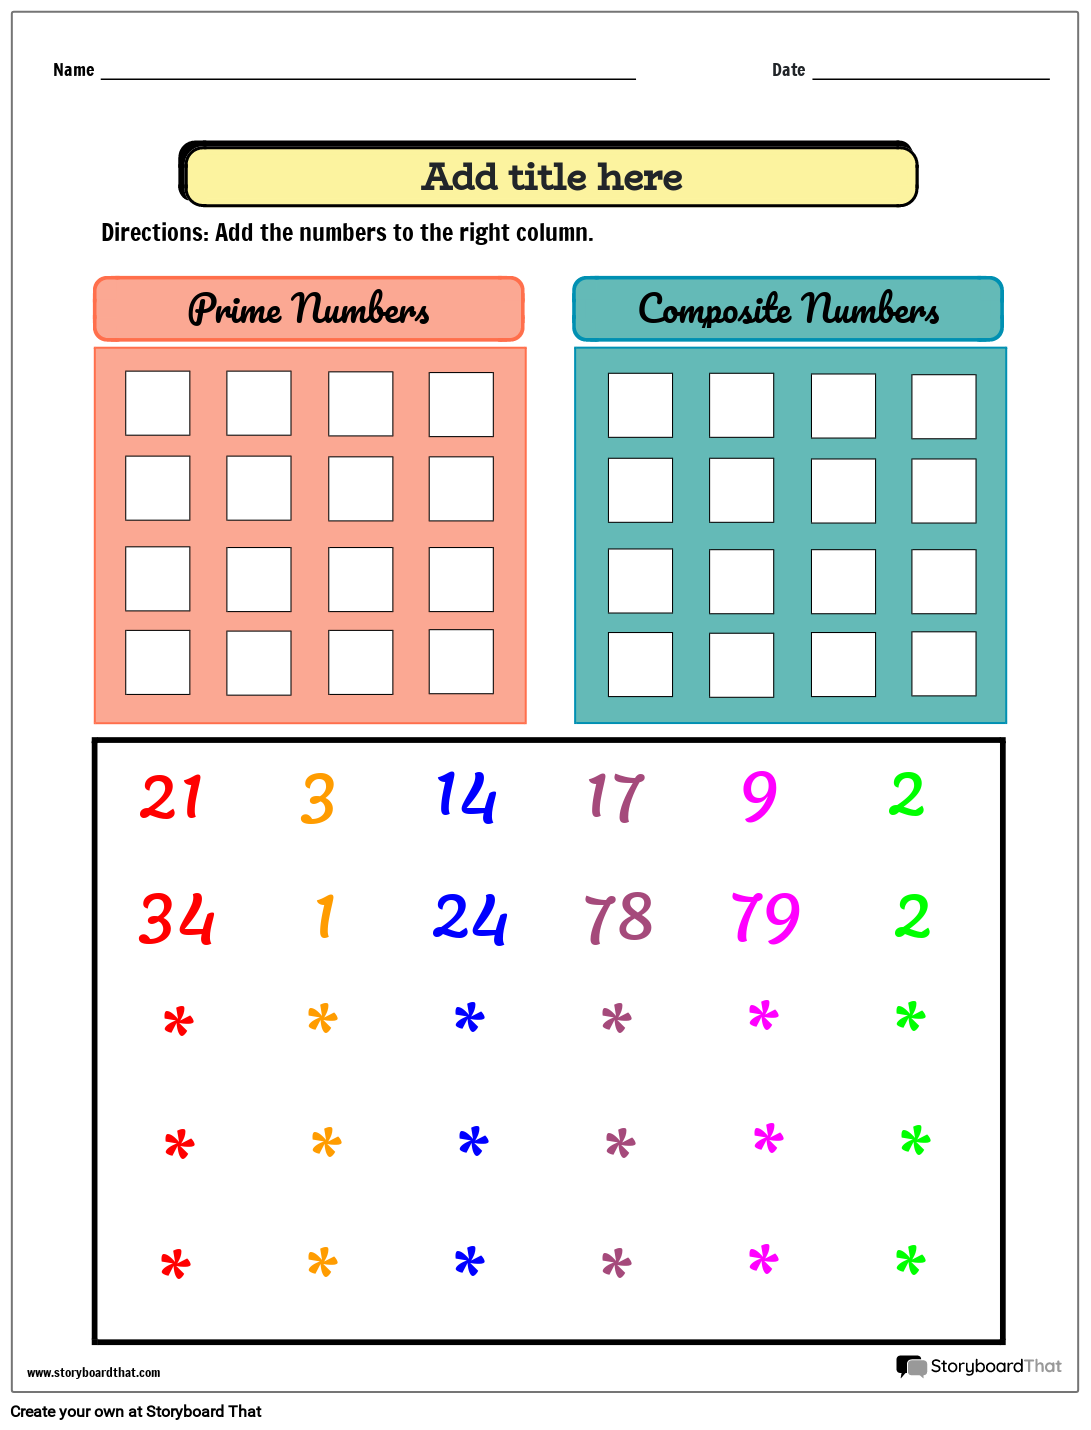 Identifying Prime and Composite Numbers Worksheet